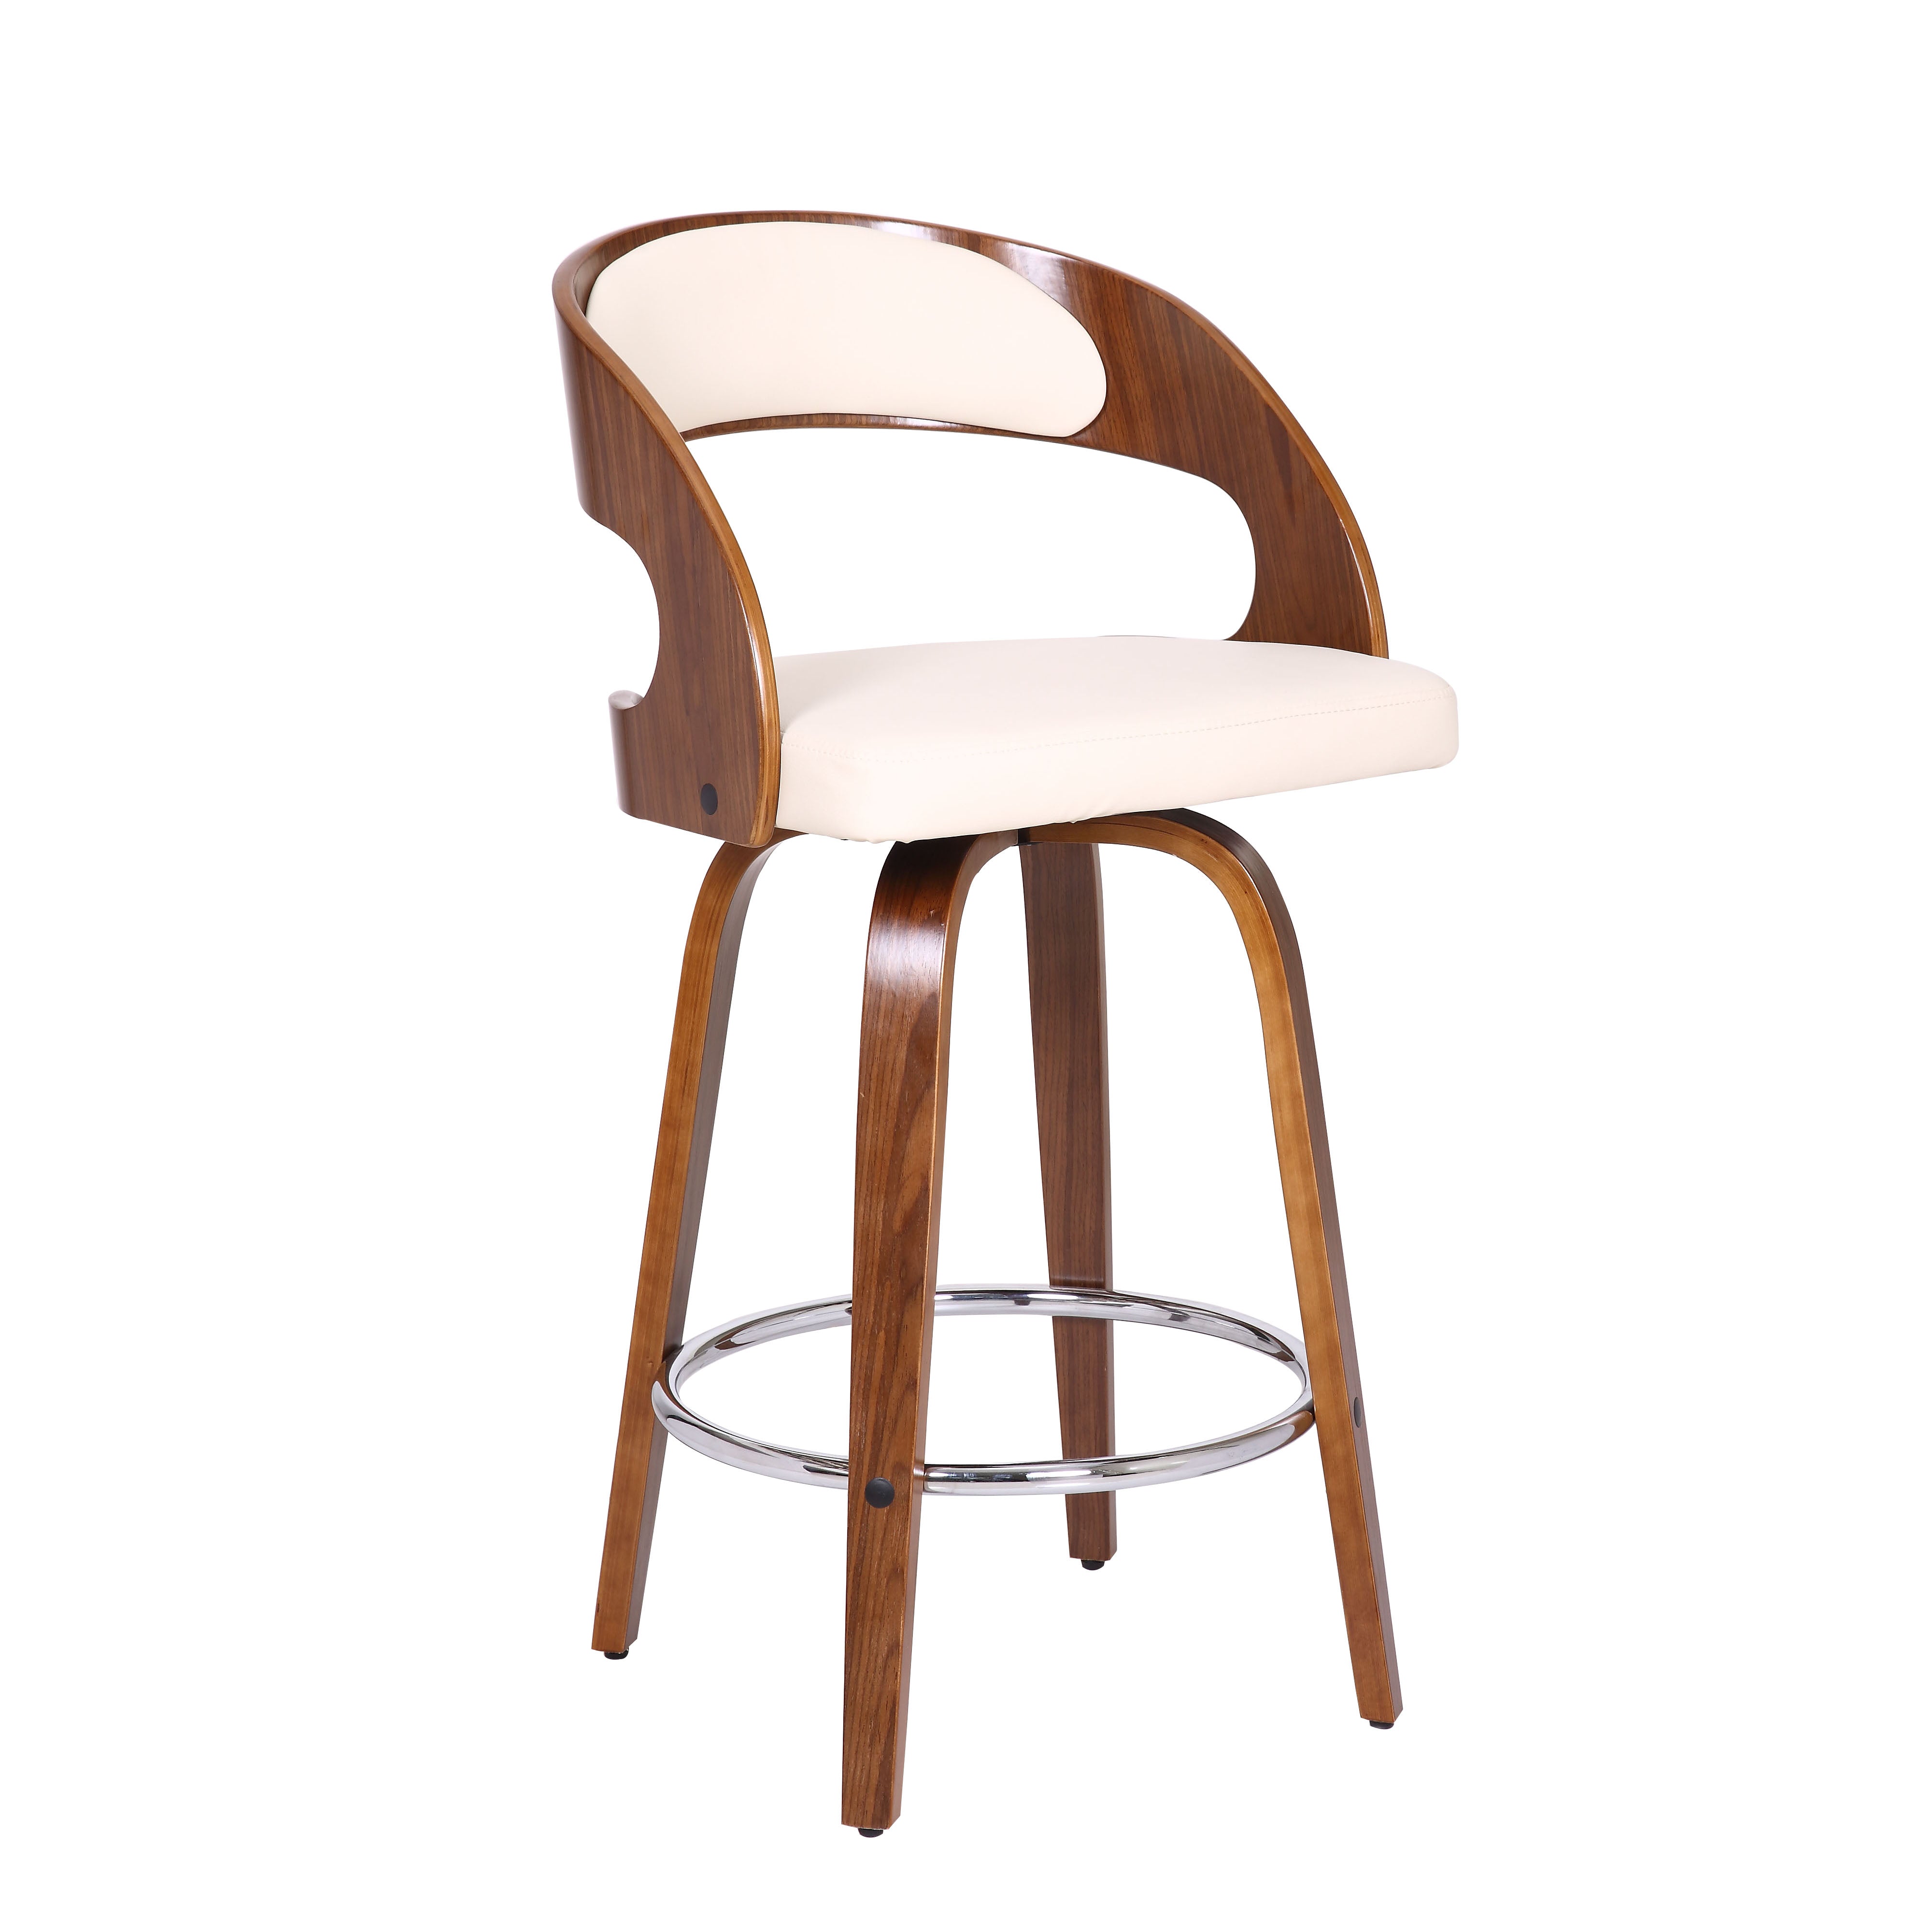 Shelly Contemporary  Barstool Swivel Barstool in Walnut Wood Finish and Cream Faux Leather